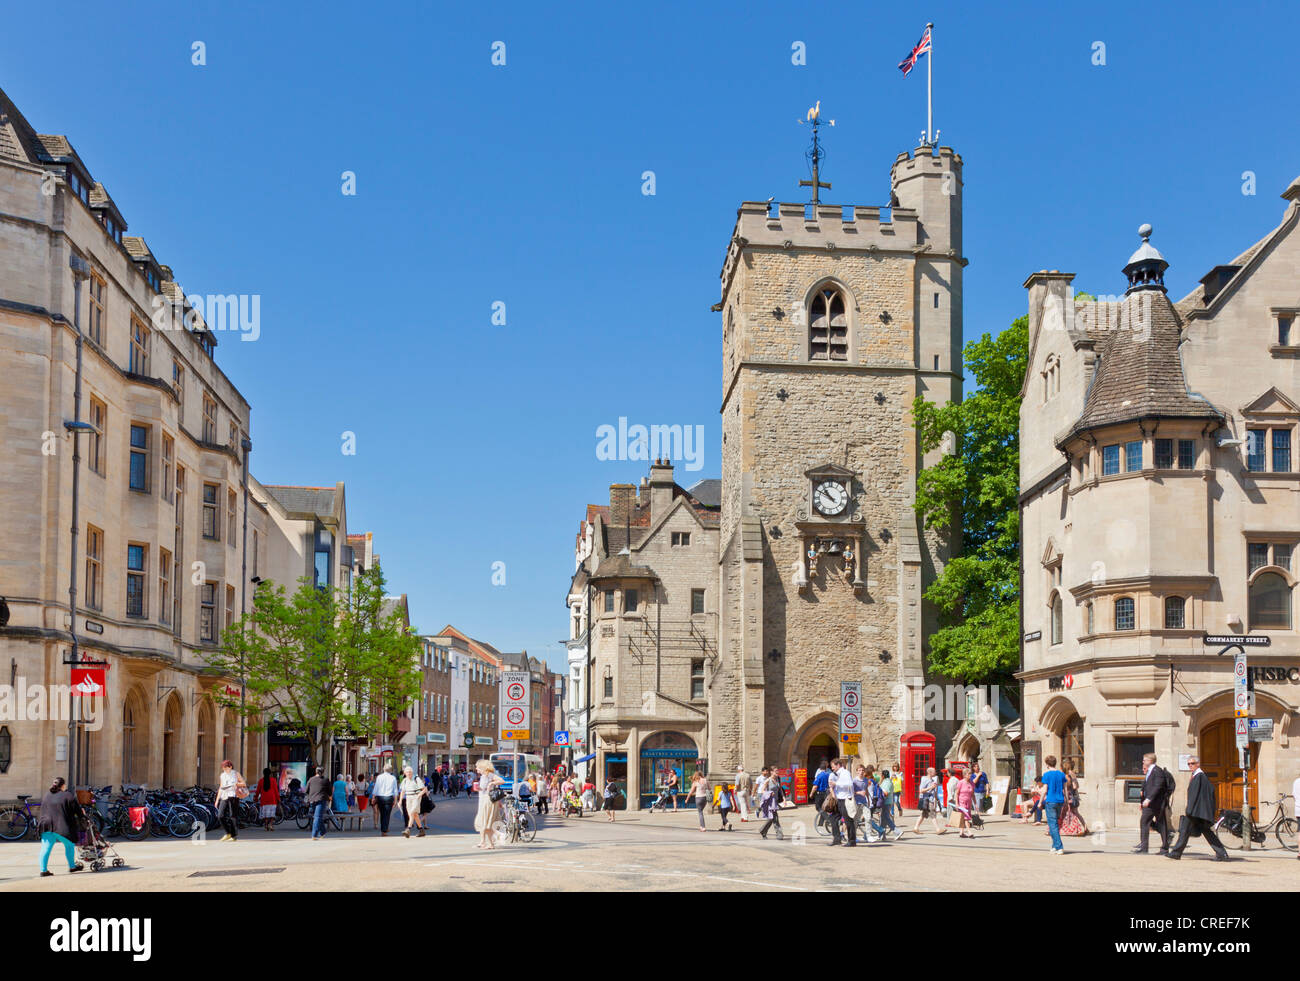 Shoppers in Oxford city centre with Carfax tower at Junction of High street Queen street St Aldates and Cornmarket street UK GB UK Europe Stock Photo